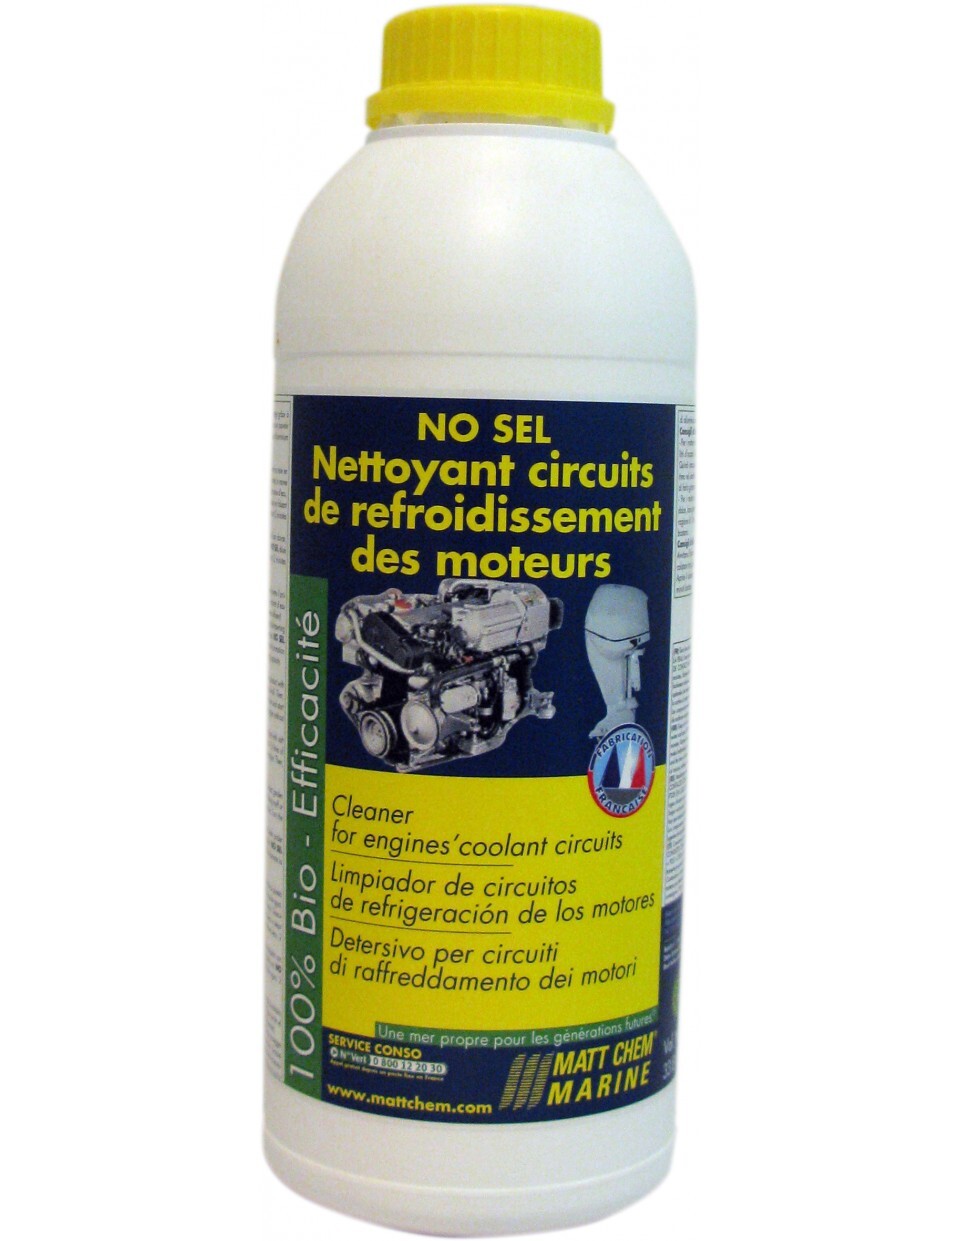 NO SEL, CONCENTRATED CLEANING COOLANT CIRCUITS, 1 L